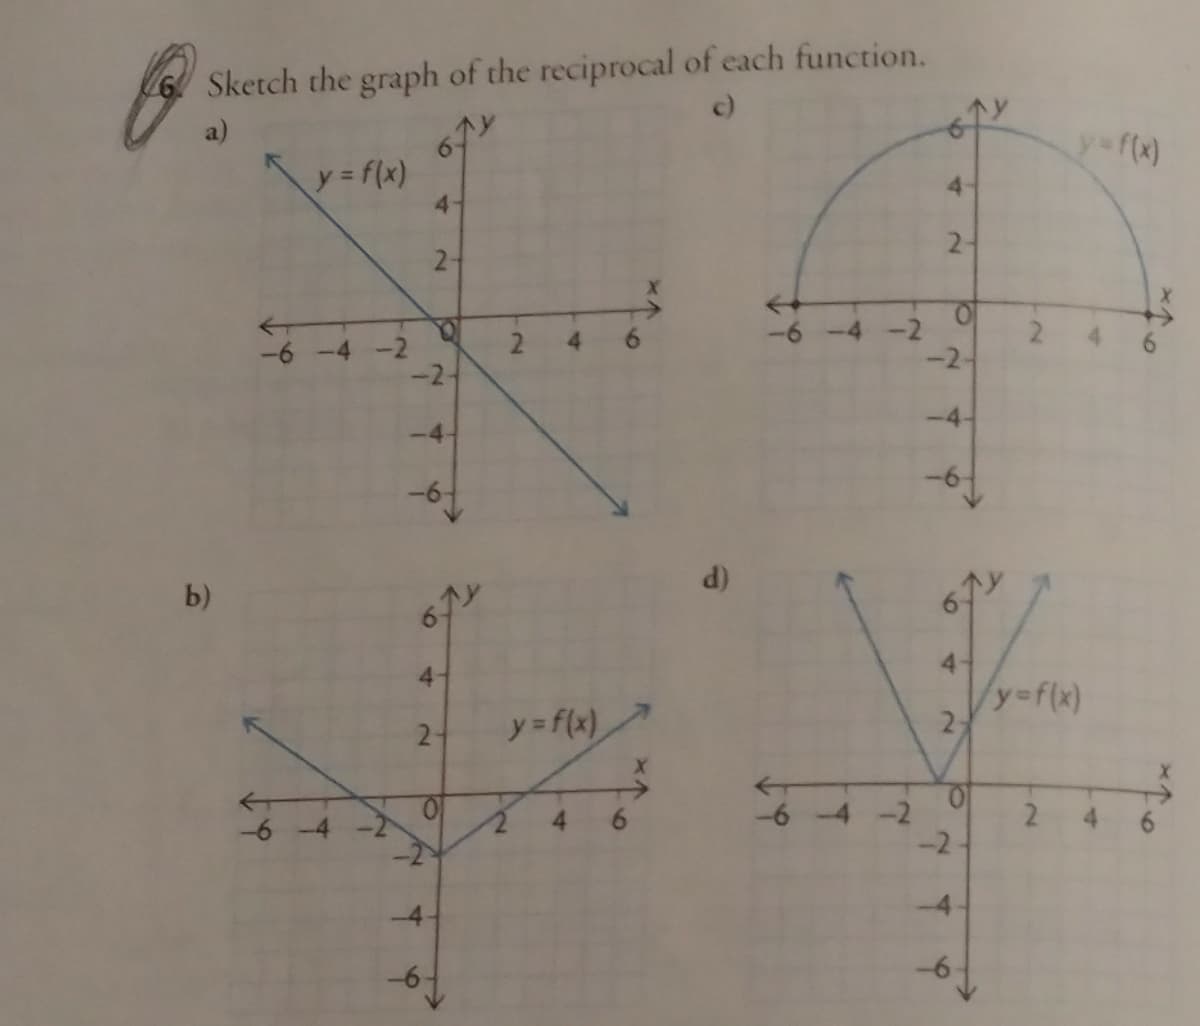 Sketch the graph of the reciprocal of each function.
c)
a)
y f(x)
y= f(x)
4-
4-
2.
-2-
2
4.
-2-
-4-
-4
d)
b)
y=f(x)
y=f(x).
4.
2.
4.
-6
-2
96
60
2.
4)
9.
2.
2.
21
-2
9-
